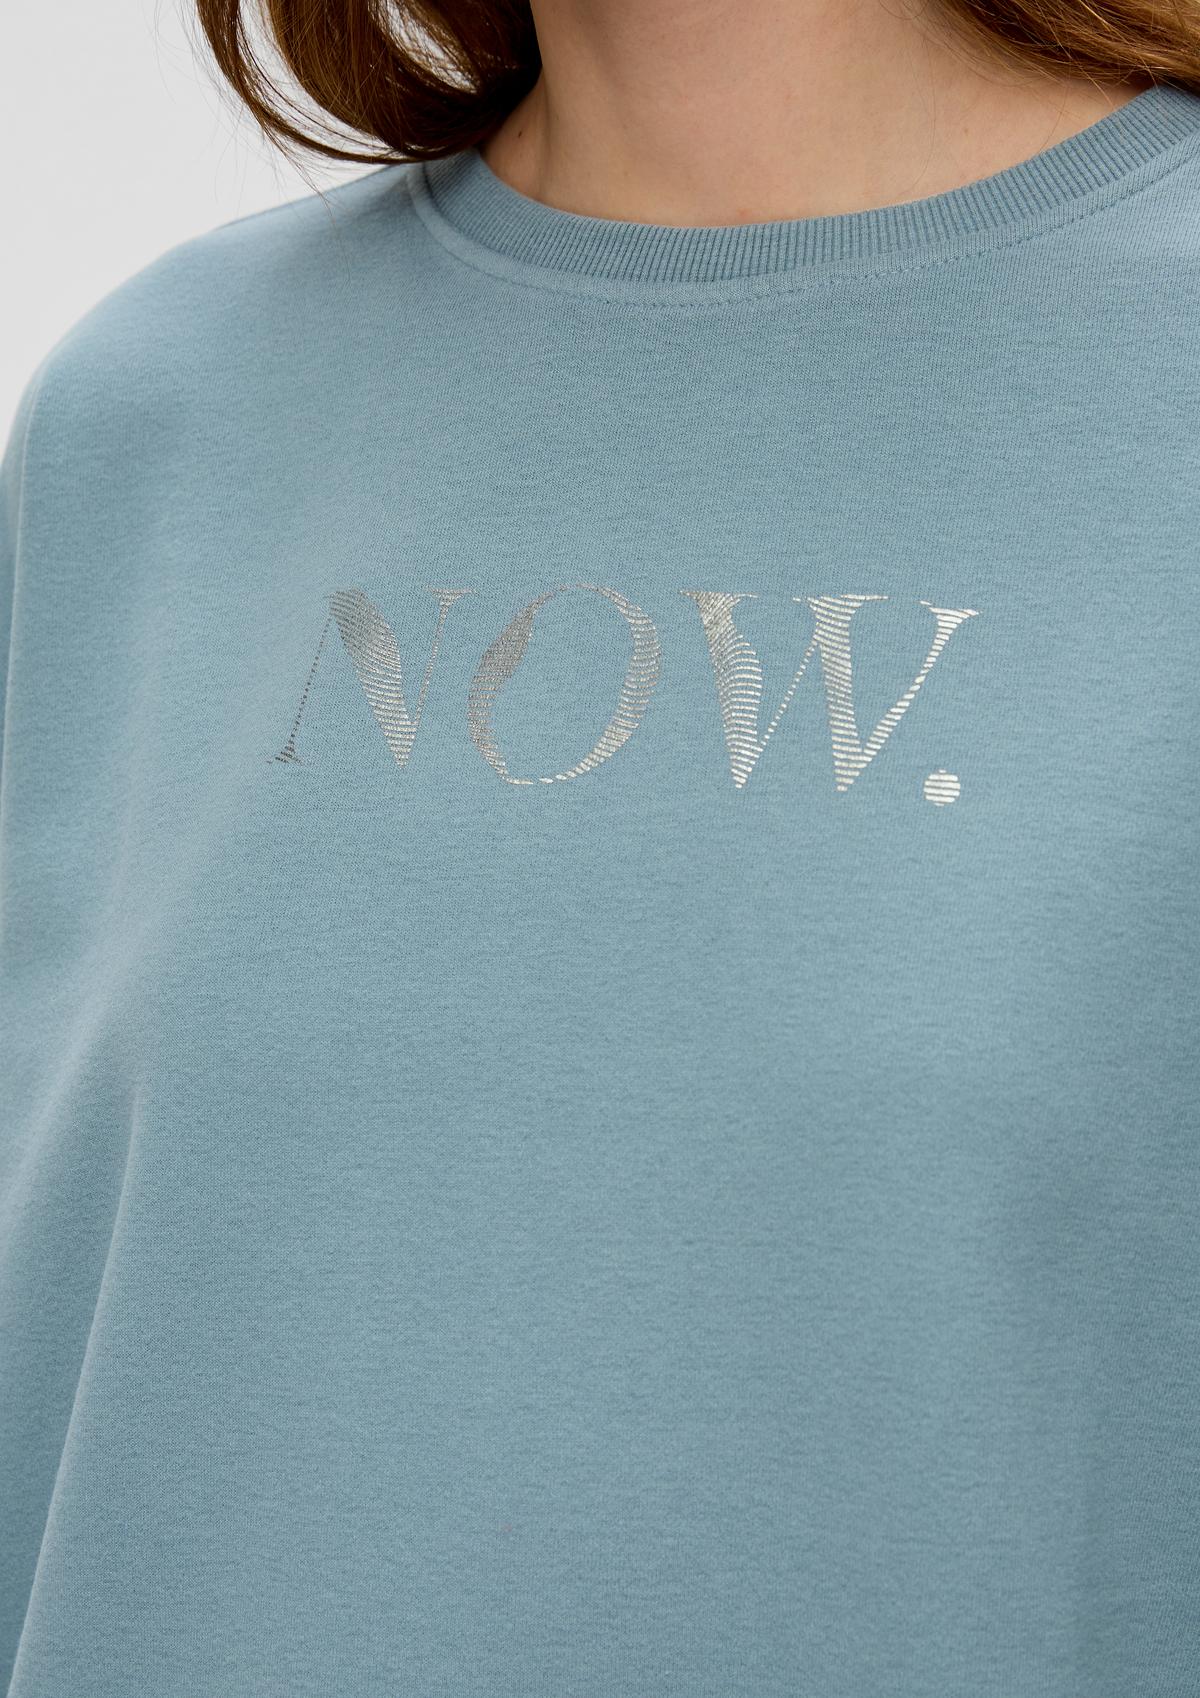 s.Oliver Sweatshirt with a statement print